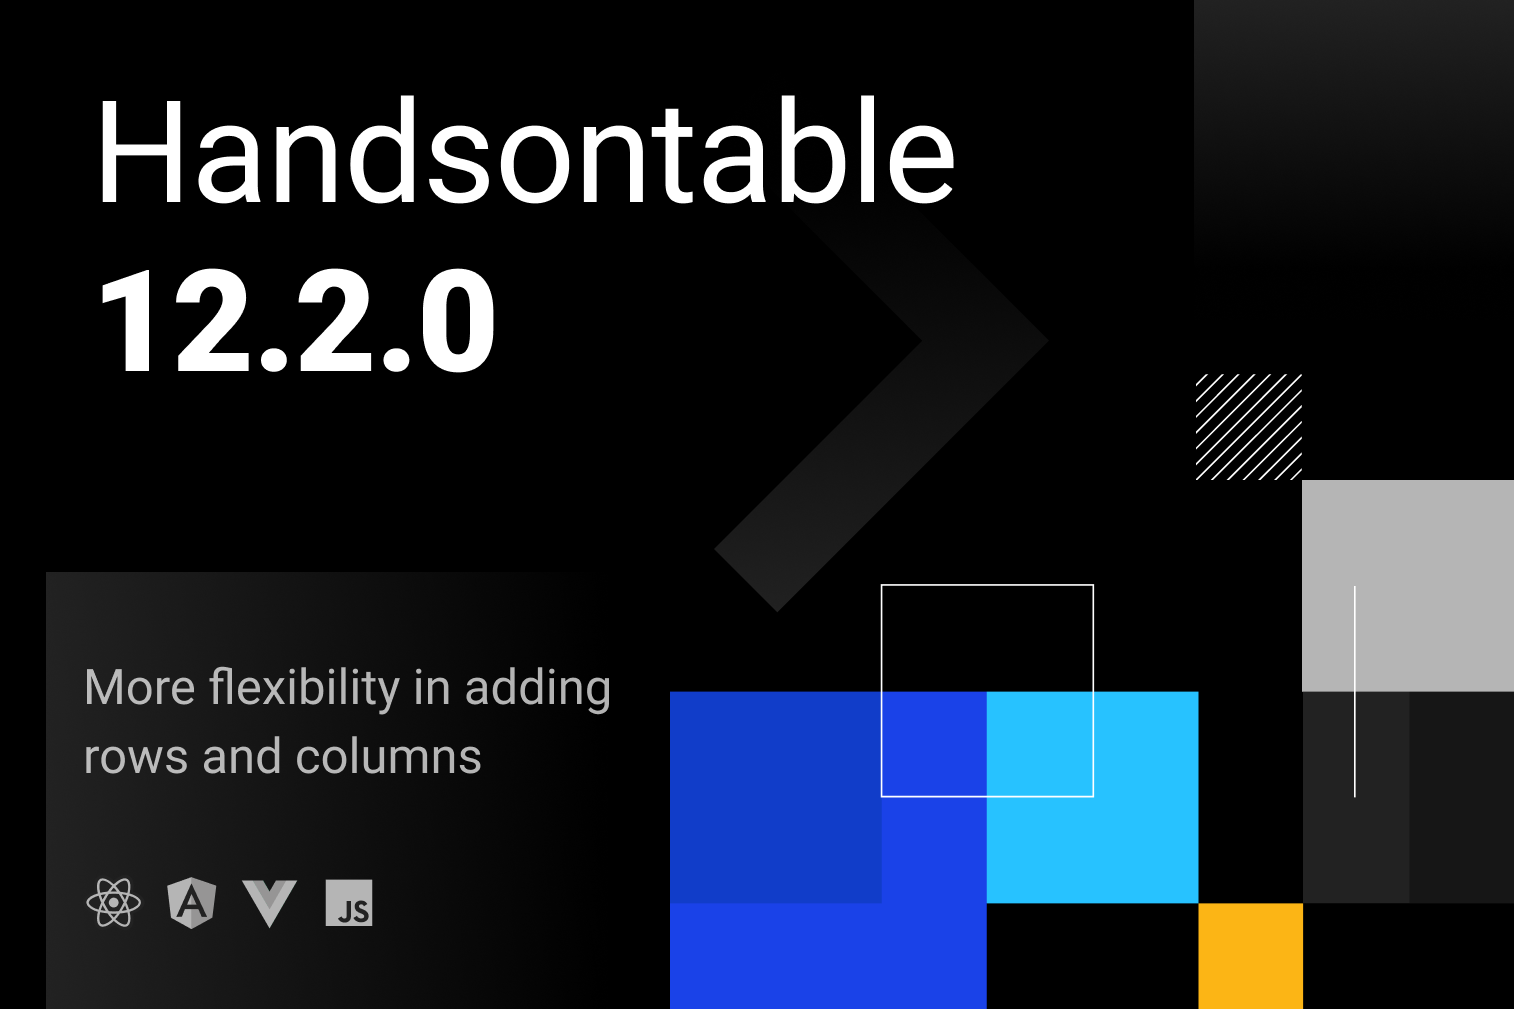 Handsontable 12.2.0: More flexibility in adding rows and columns